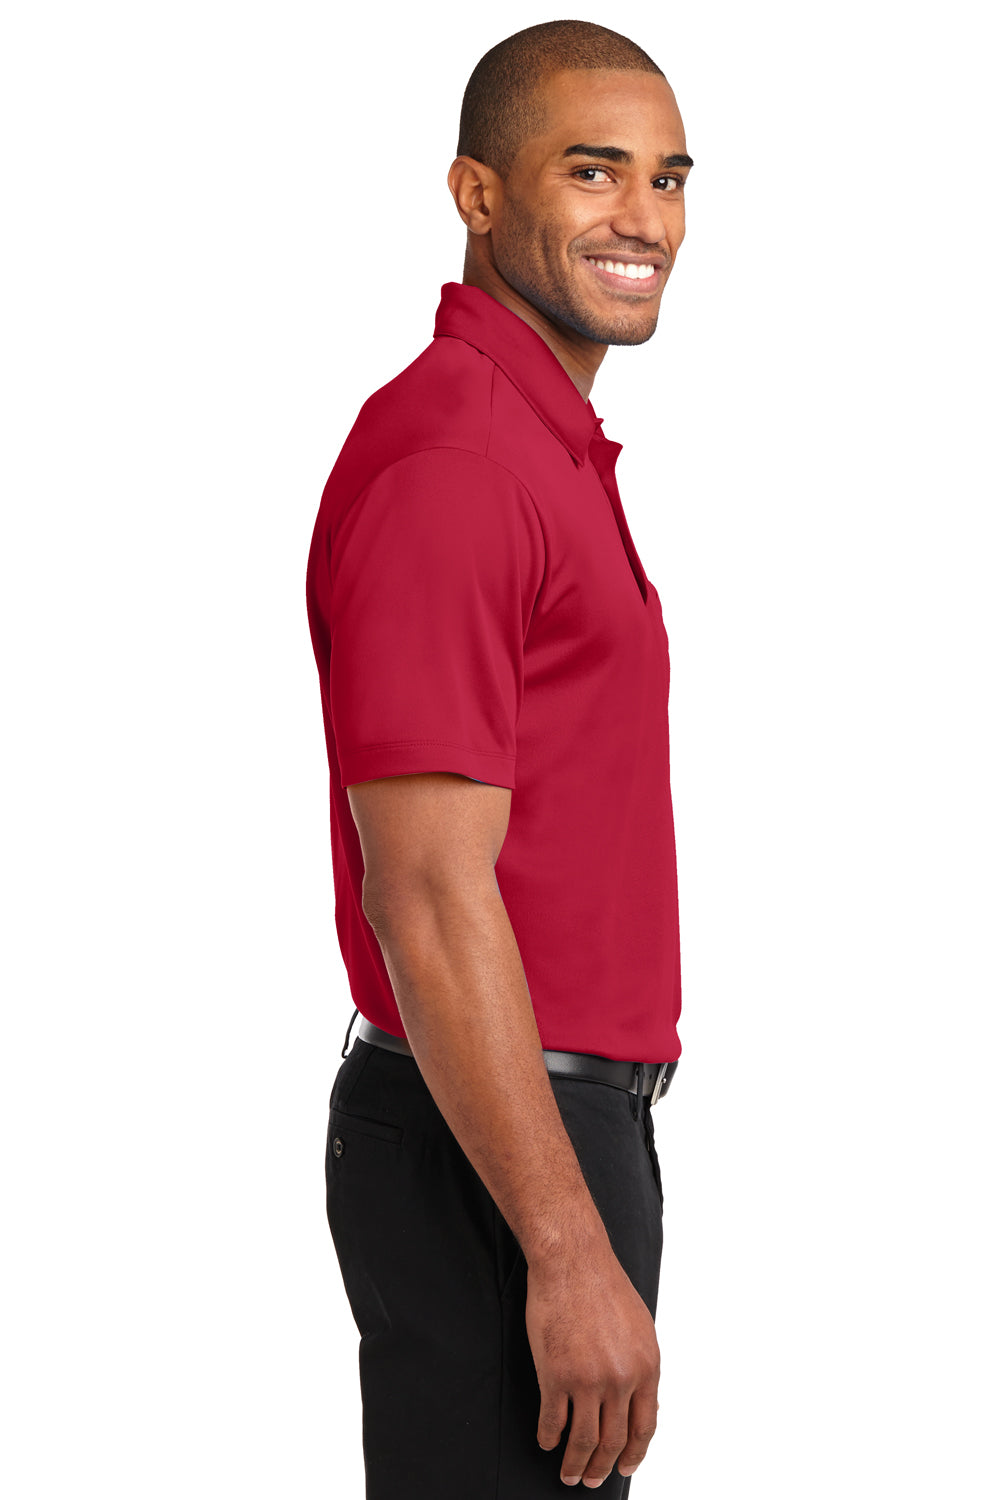 Port Authority K540P Mens Silk Touch Performance Moisture Wicking Short Sleeve Polo Shirt w/ Pocket Red Side